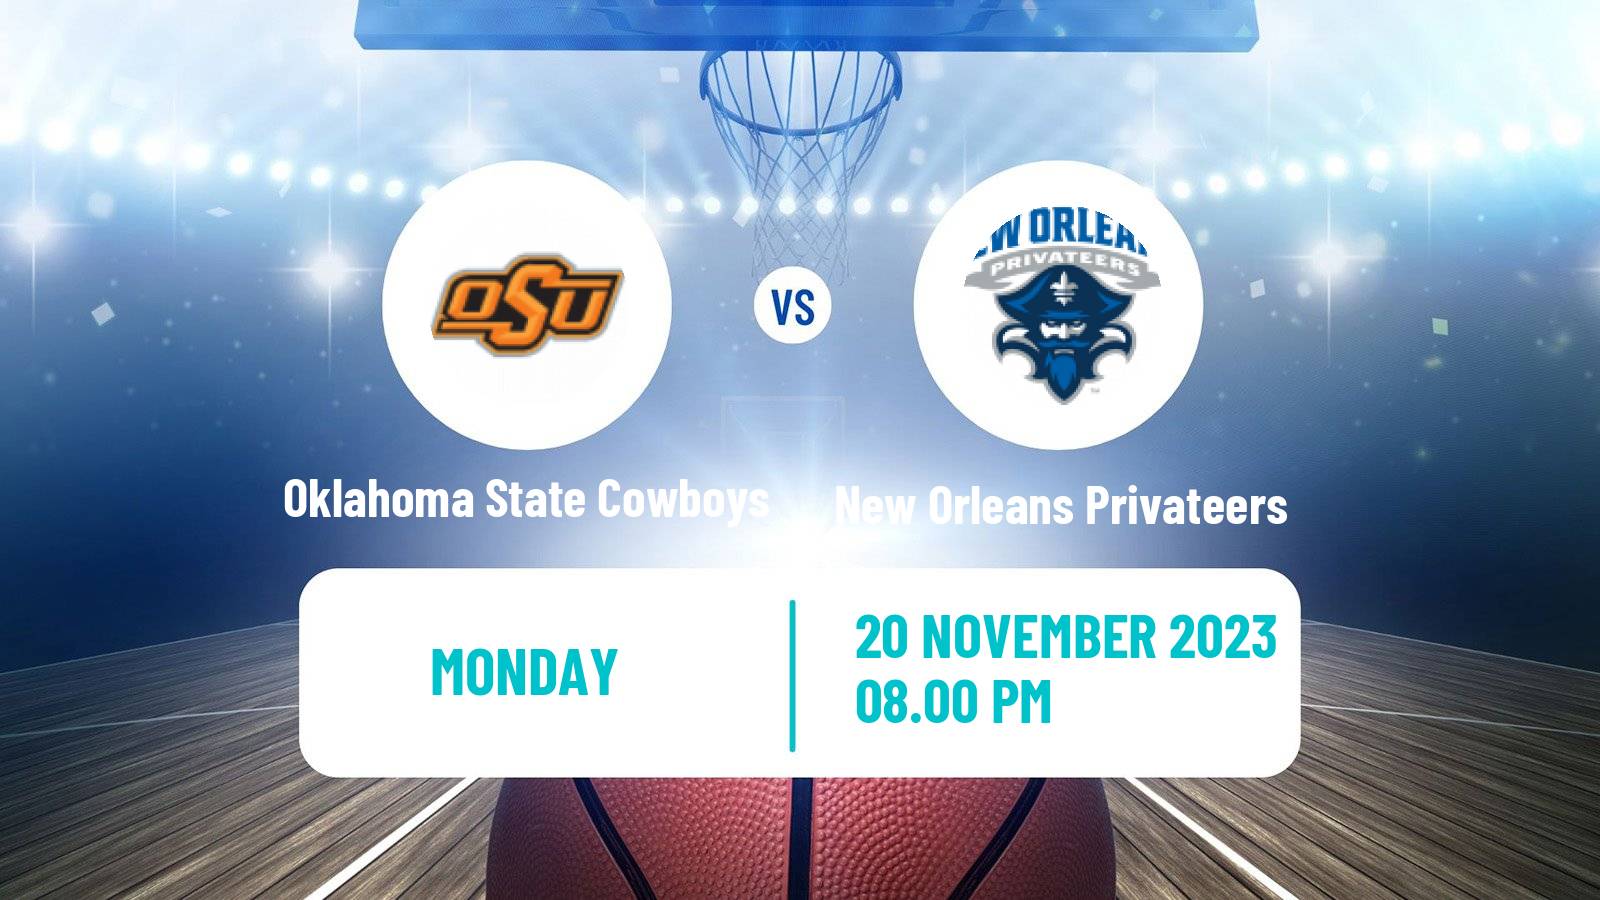 Basketball NCAA College Basketball Oklahoma State Cowboys - New Orleans Privateers